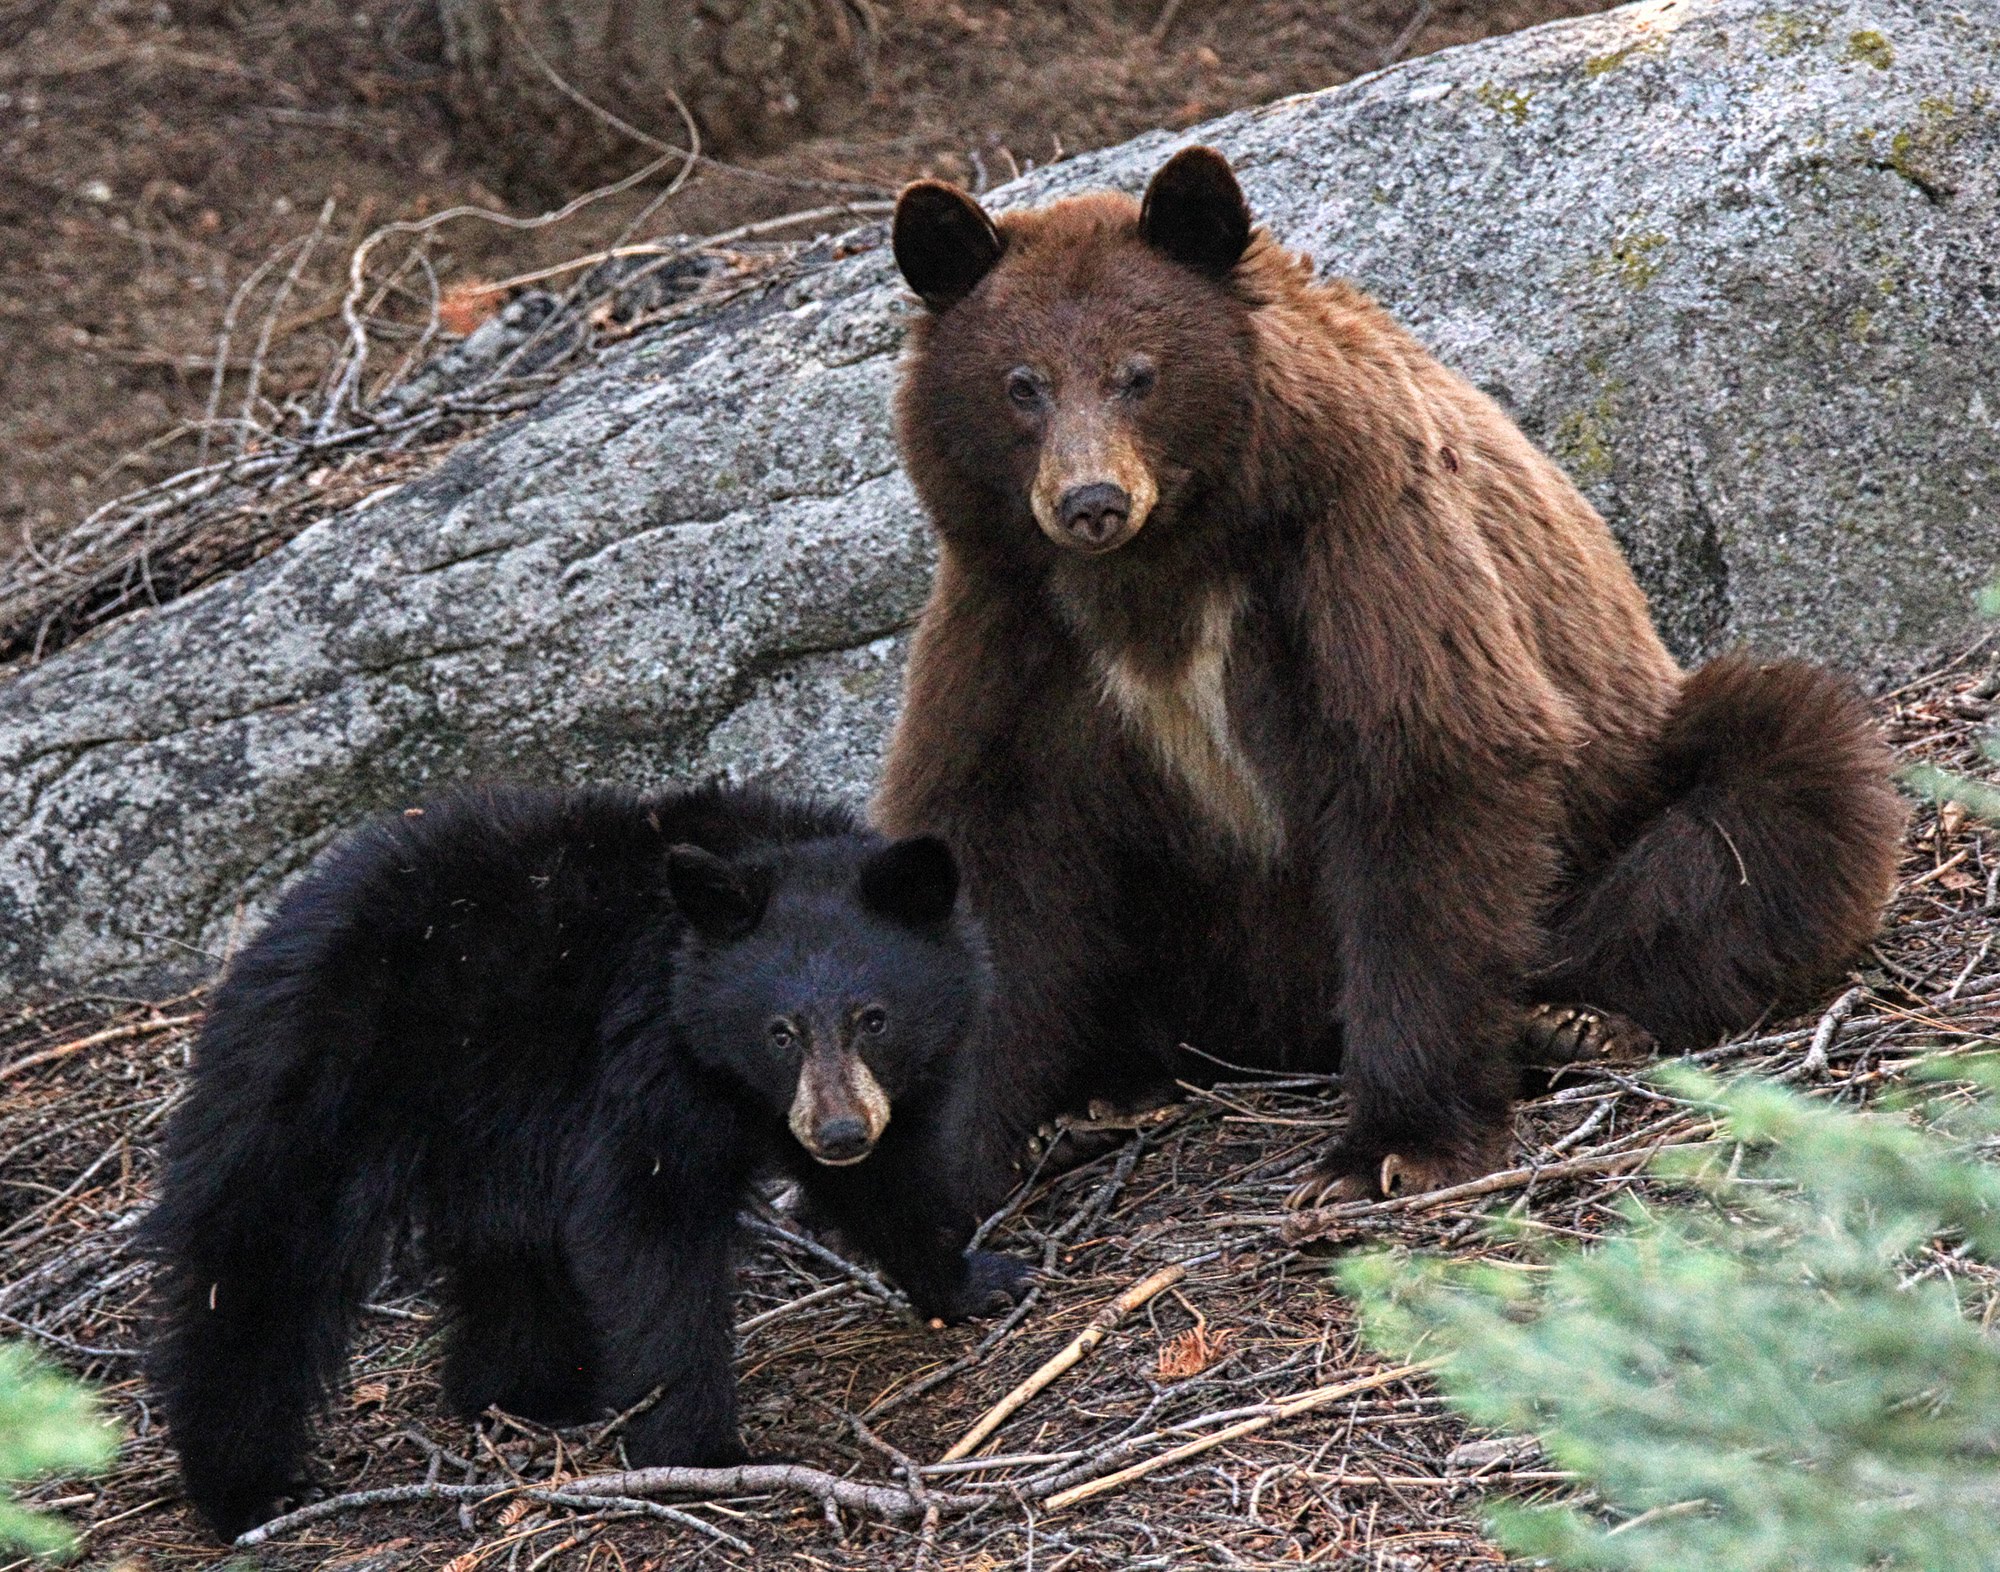 Black Bears Playing at Sequoia National Park - YouTube